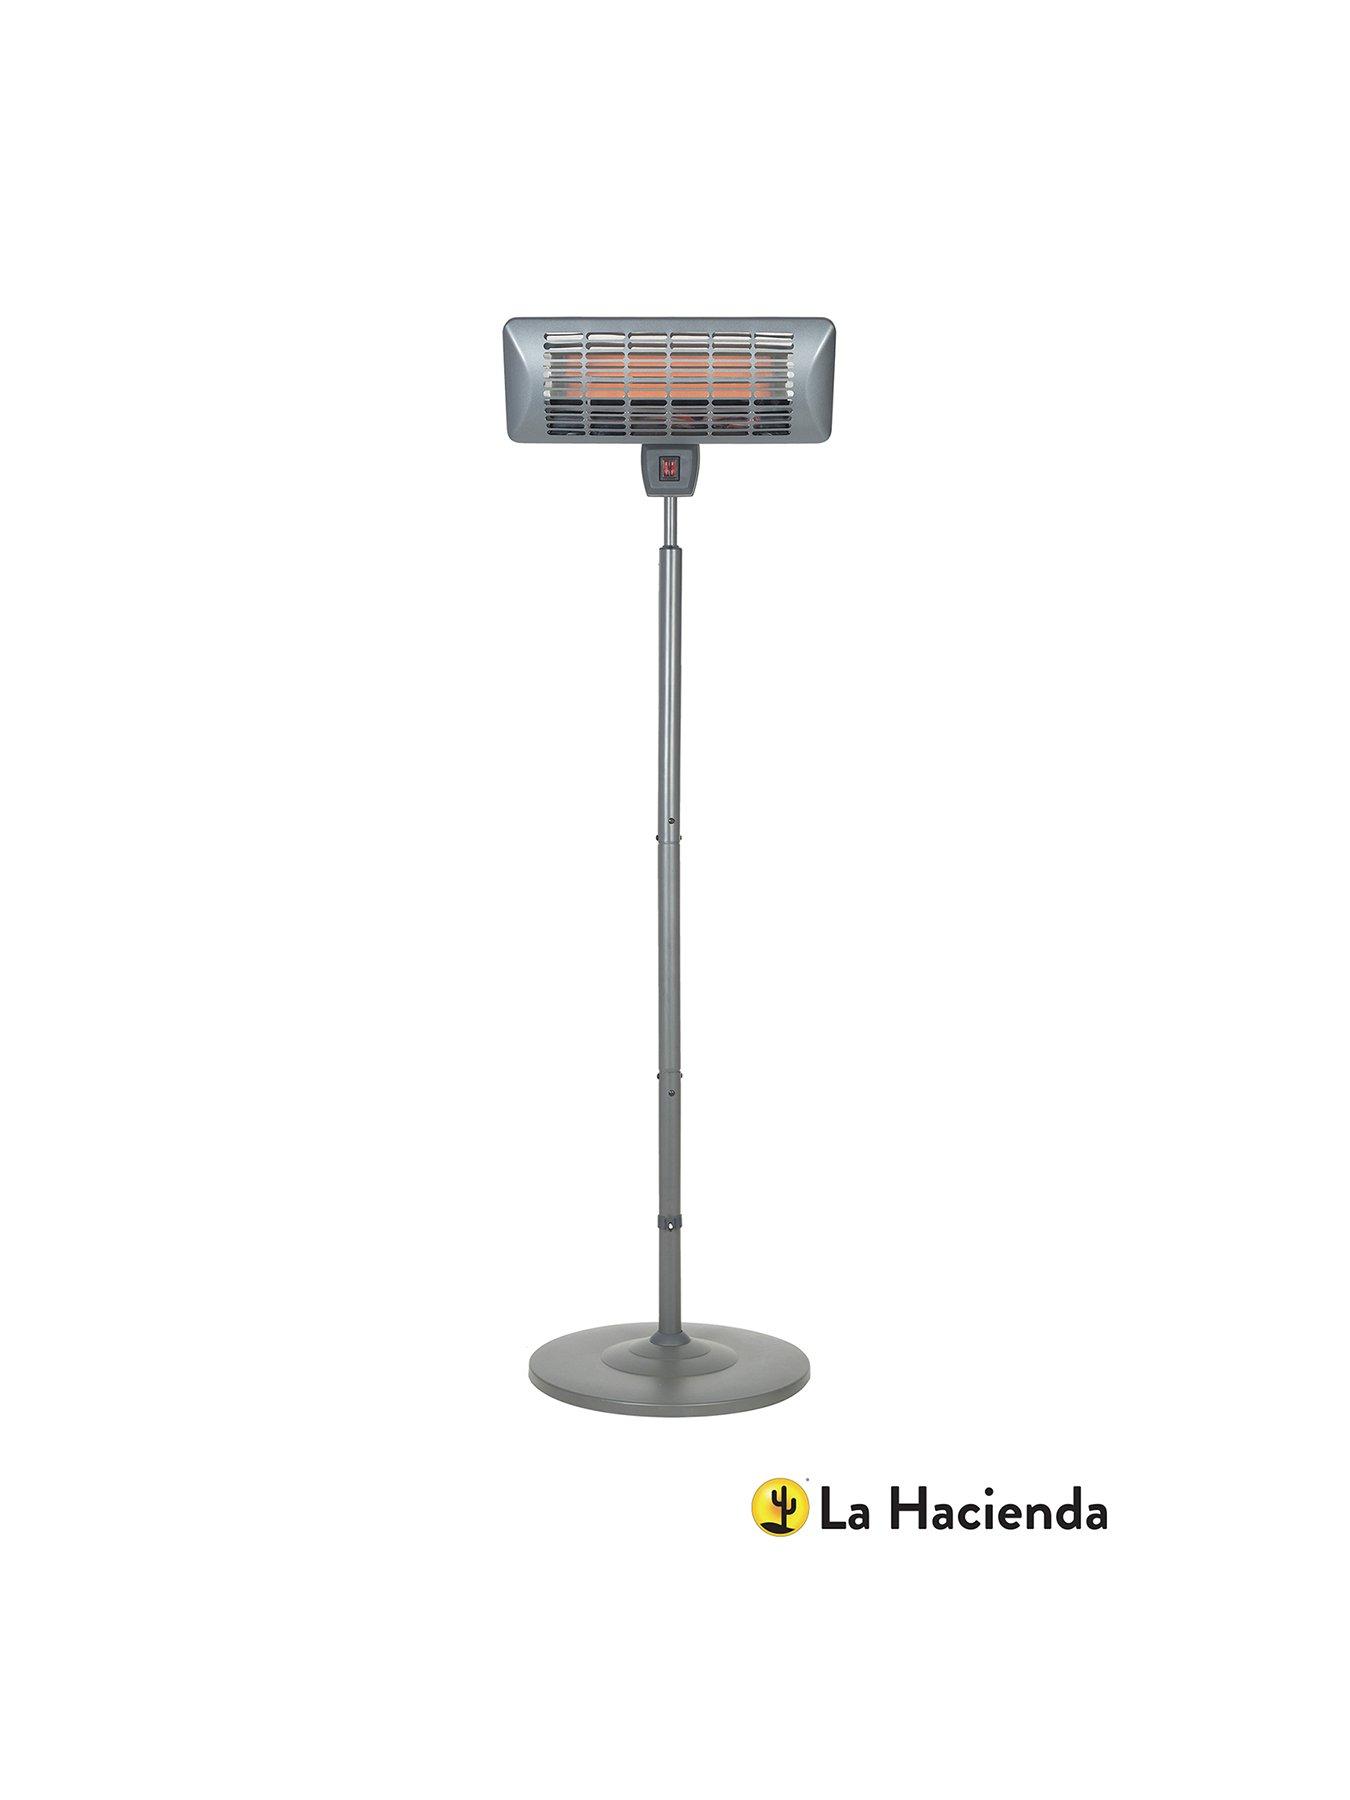 Tripod stand for Heatmaster patio heaters Black finish